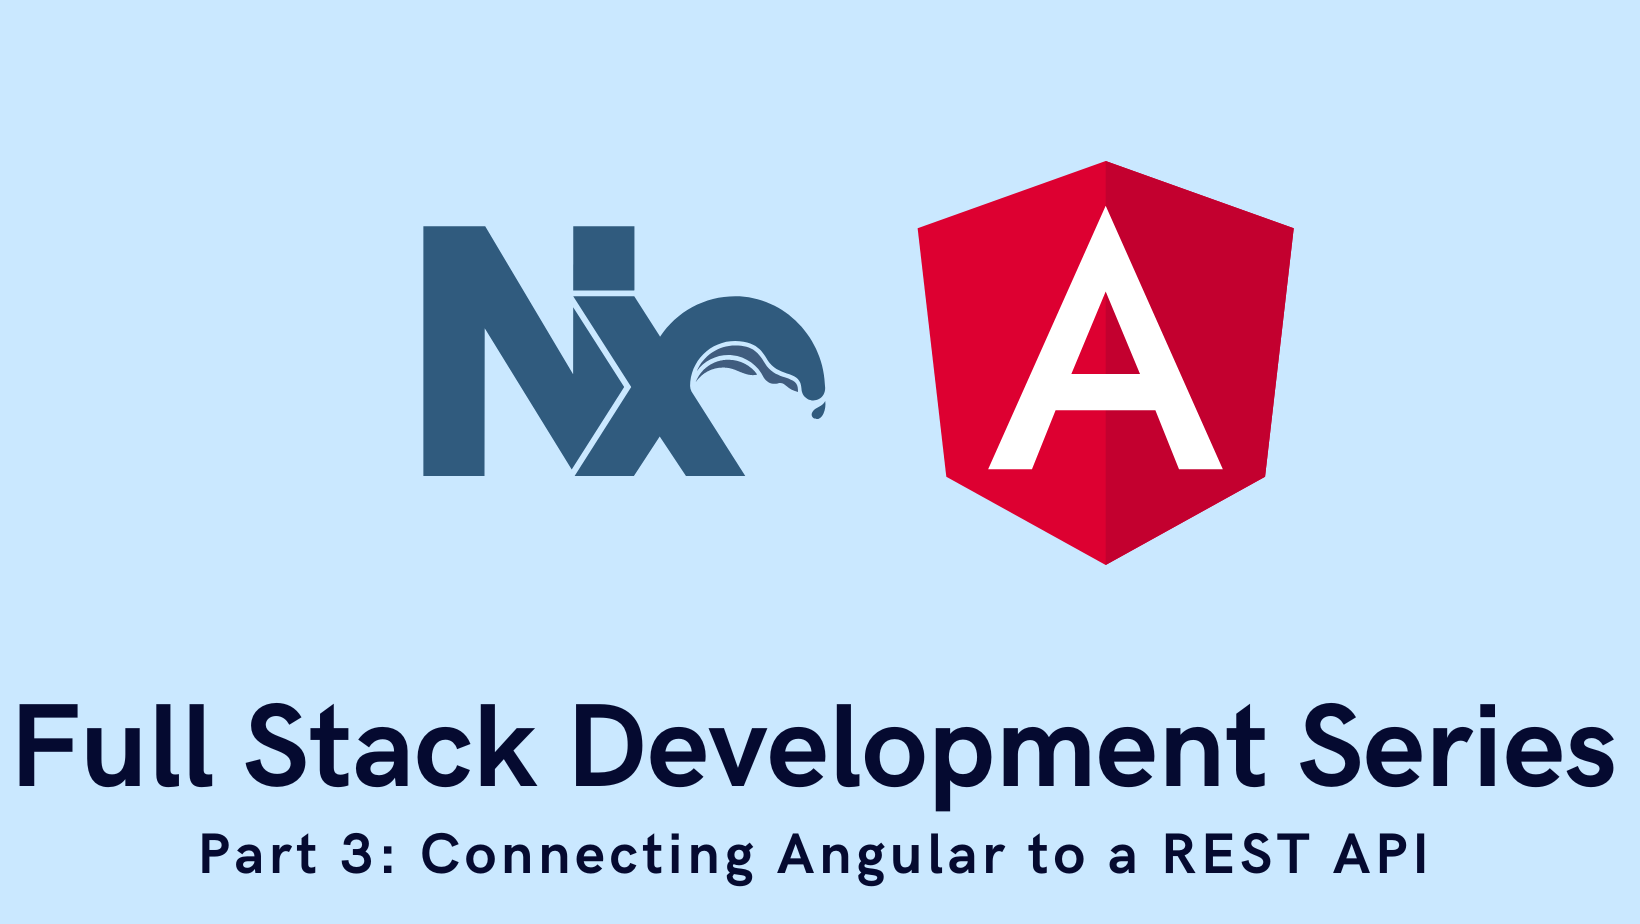 Full Stack Development Series Part 3: Connecting Angular to a REST API